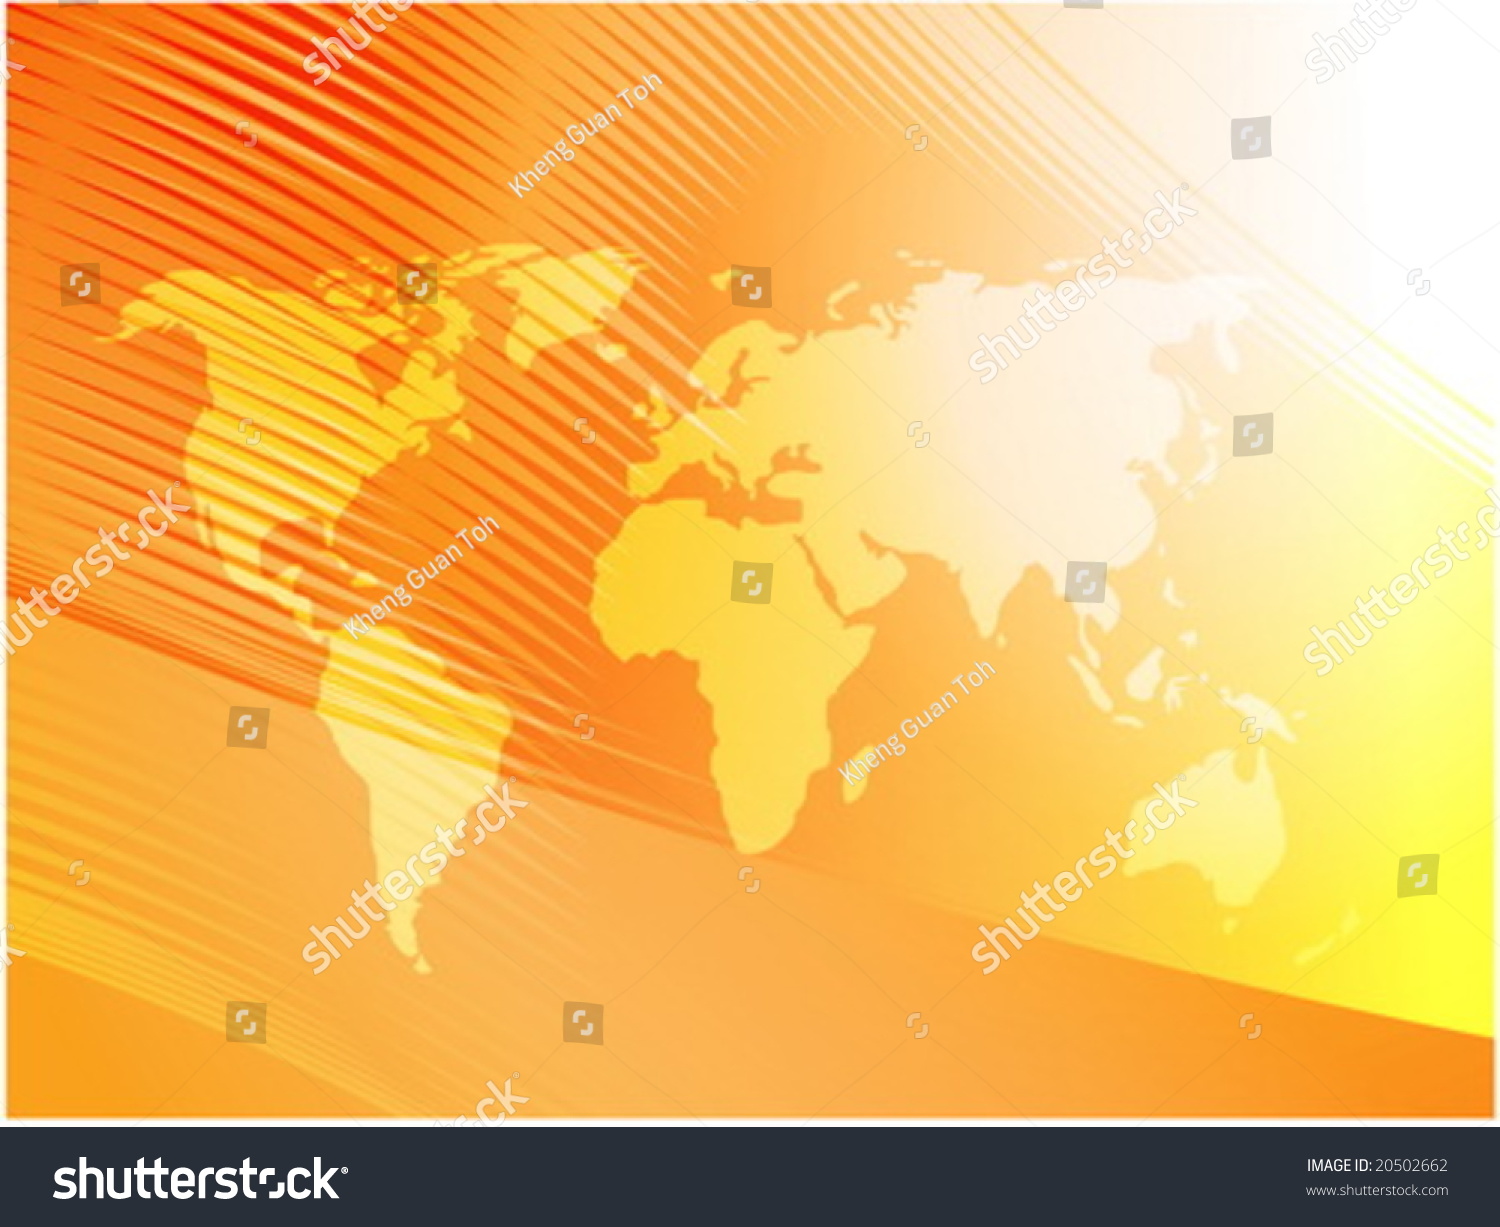 Map of the world illustration, with abstract curved lines #20502662